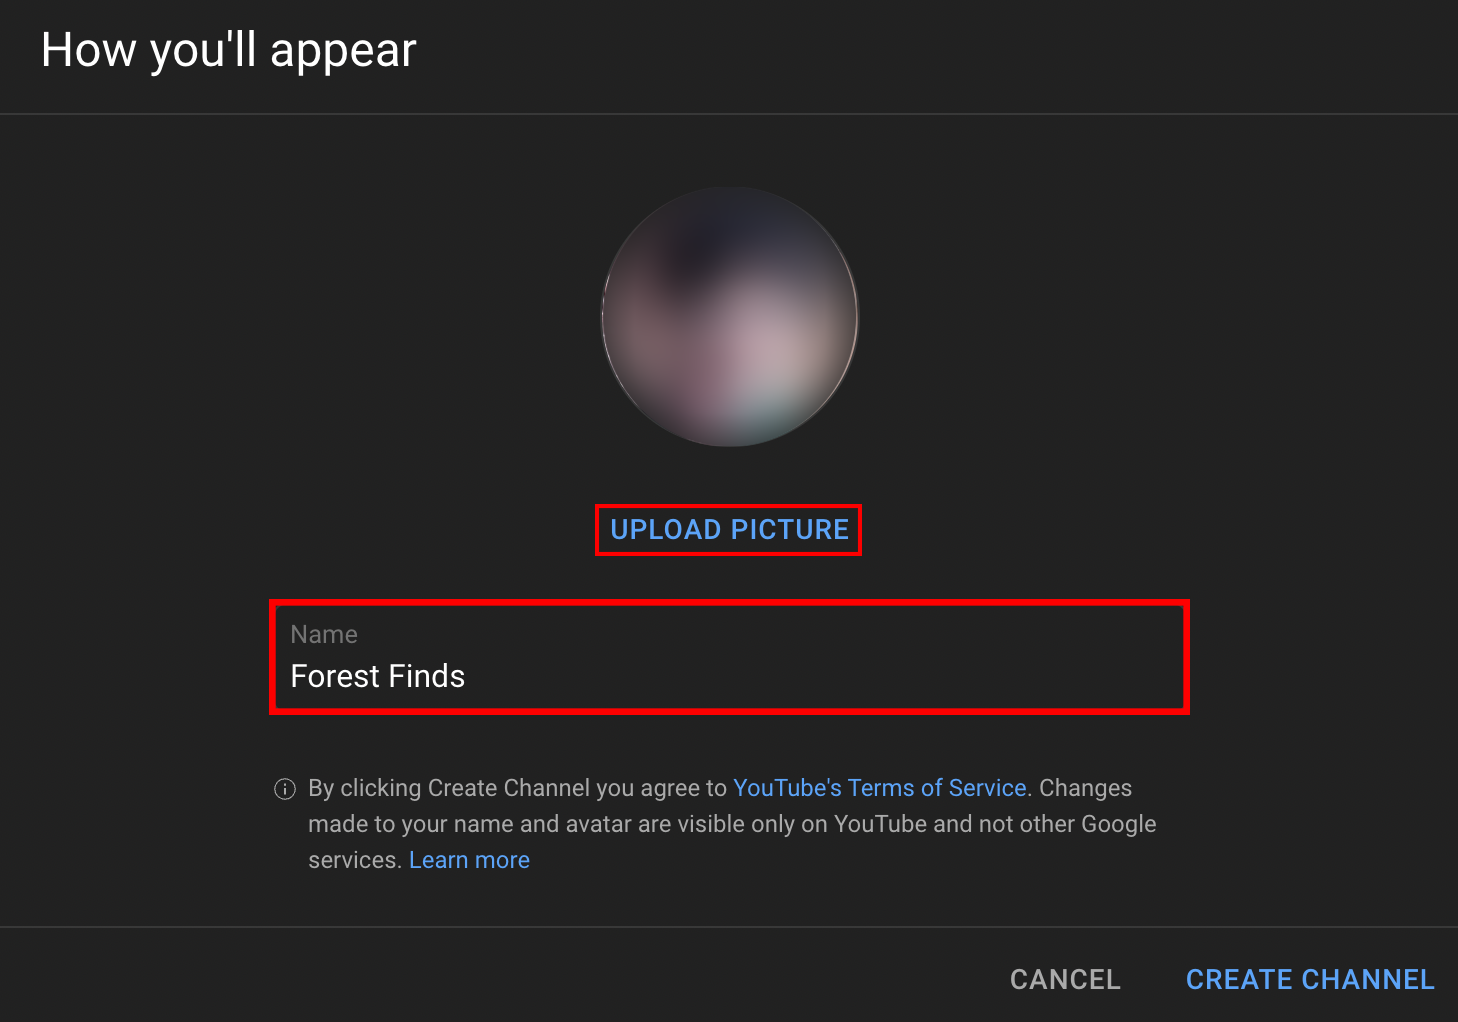 Create a channel screen with options to upload profile picture and name your channel